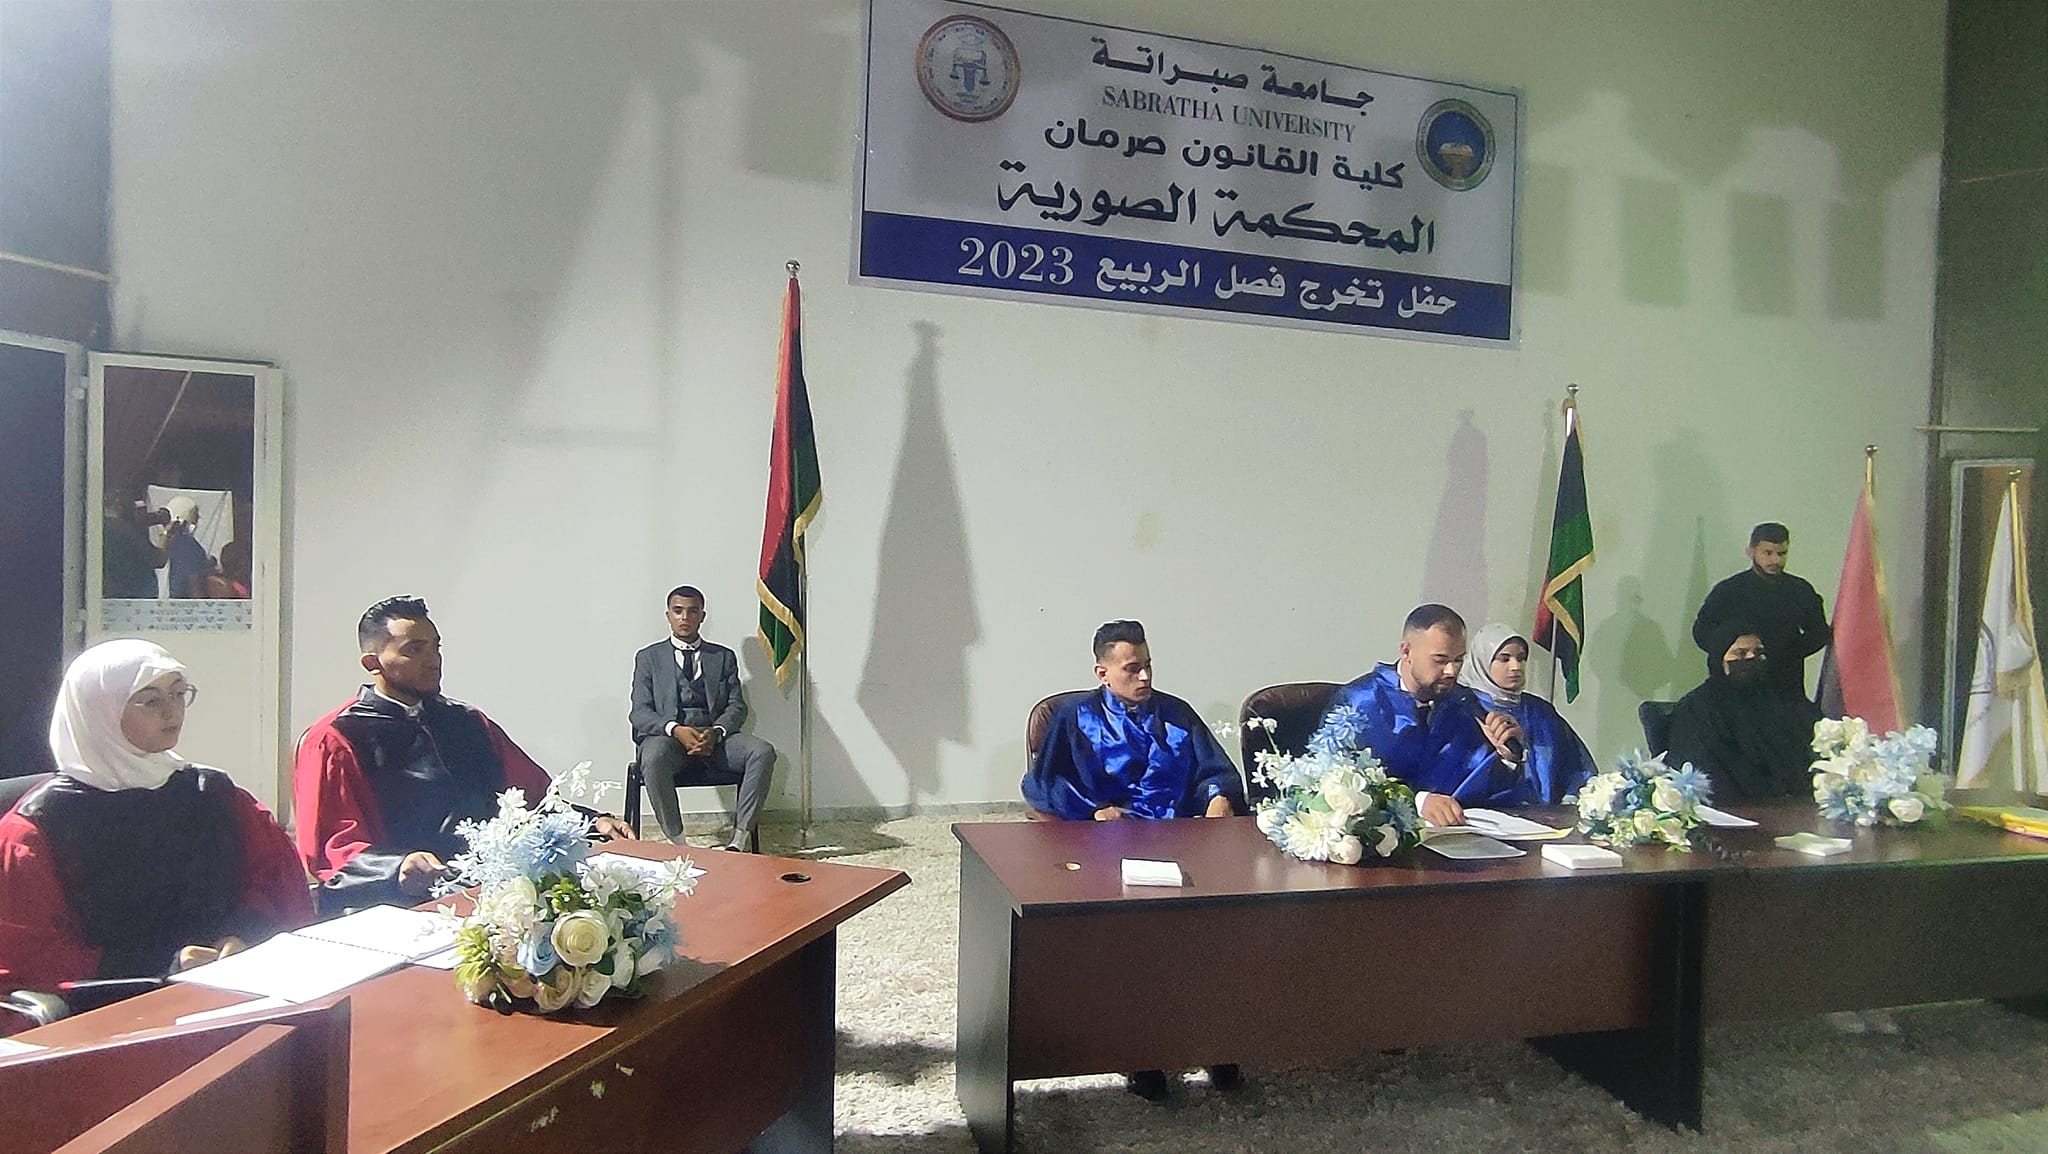 Sorman College of Law - Sabratha University organizes the graduation ceremony for the 20th batch, spring semester 2023, which
